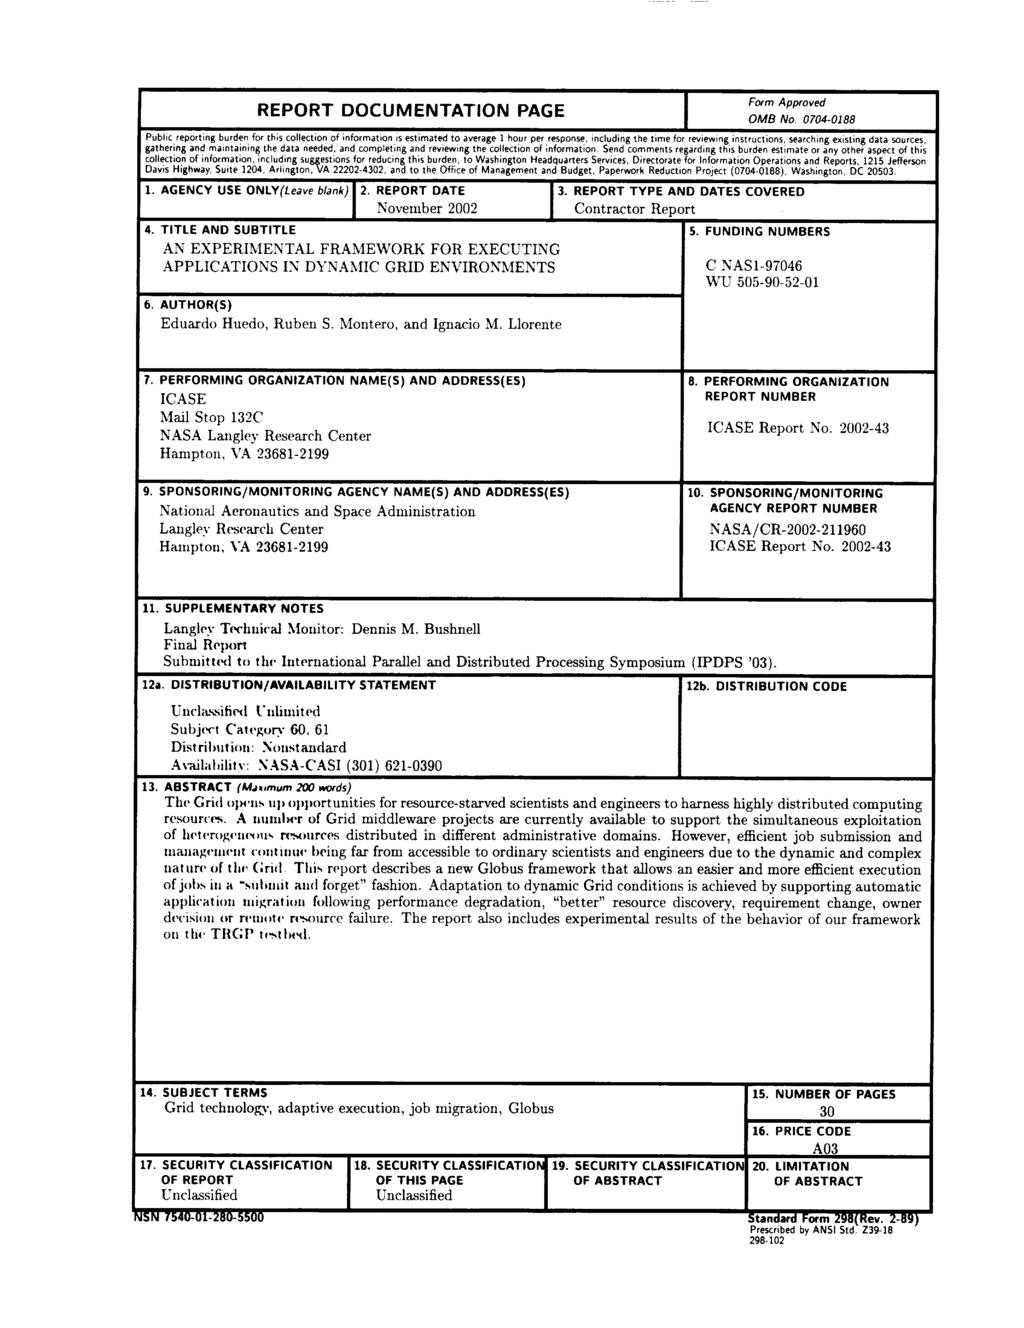 Form Approved REPORT DOCUMENTATION PAGE OMB No o7o4-o188 Publicreportingburdenforthiscollectionof informationisestimatedtoaveragei hourperresponse, includingthetimeforreviewing instructions,searching